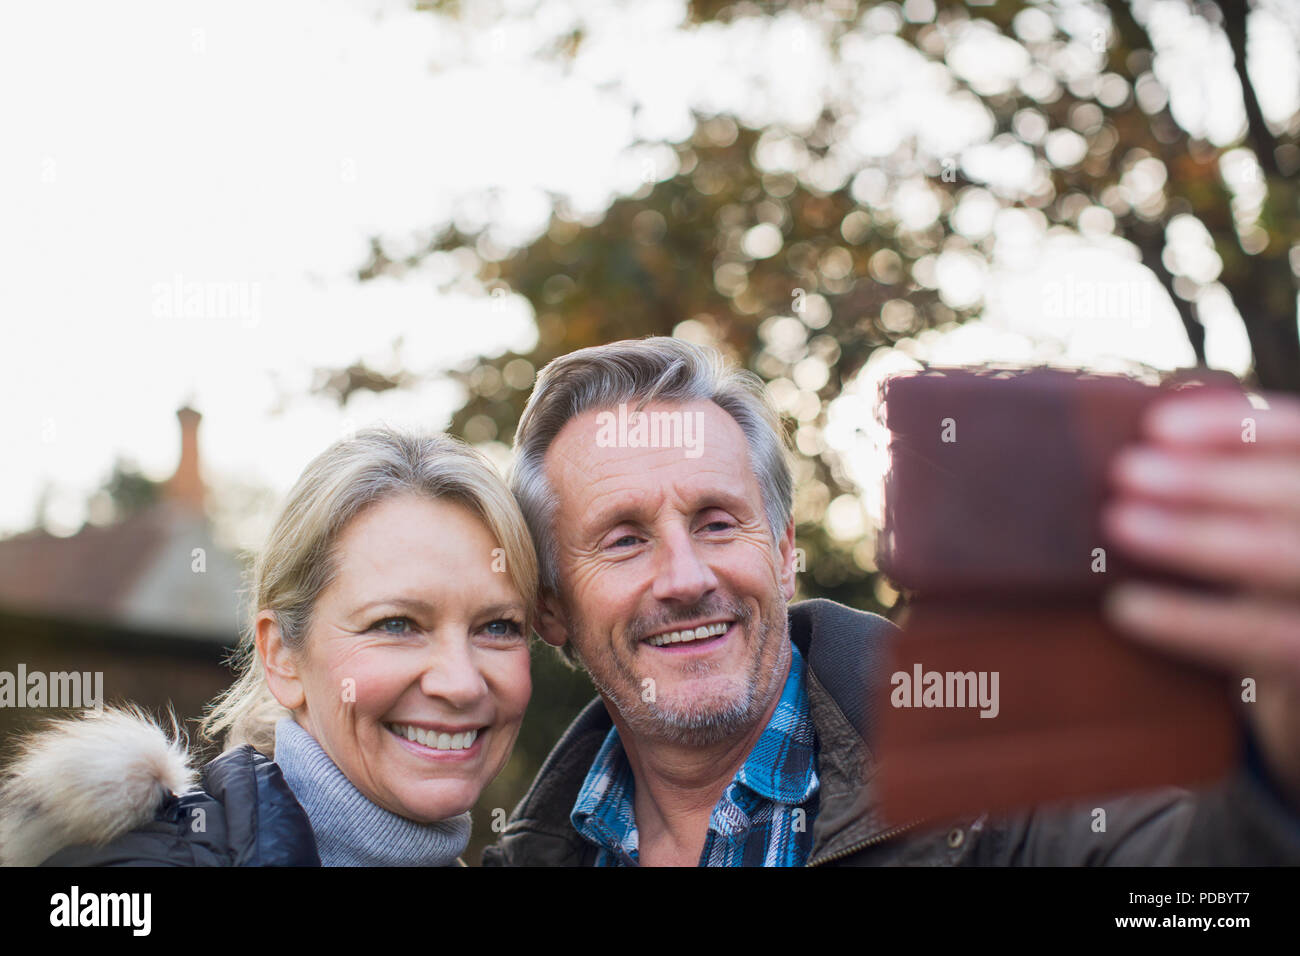 Smiling, happy mature couple taking selfie with camera phone Stock Photo